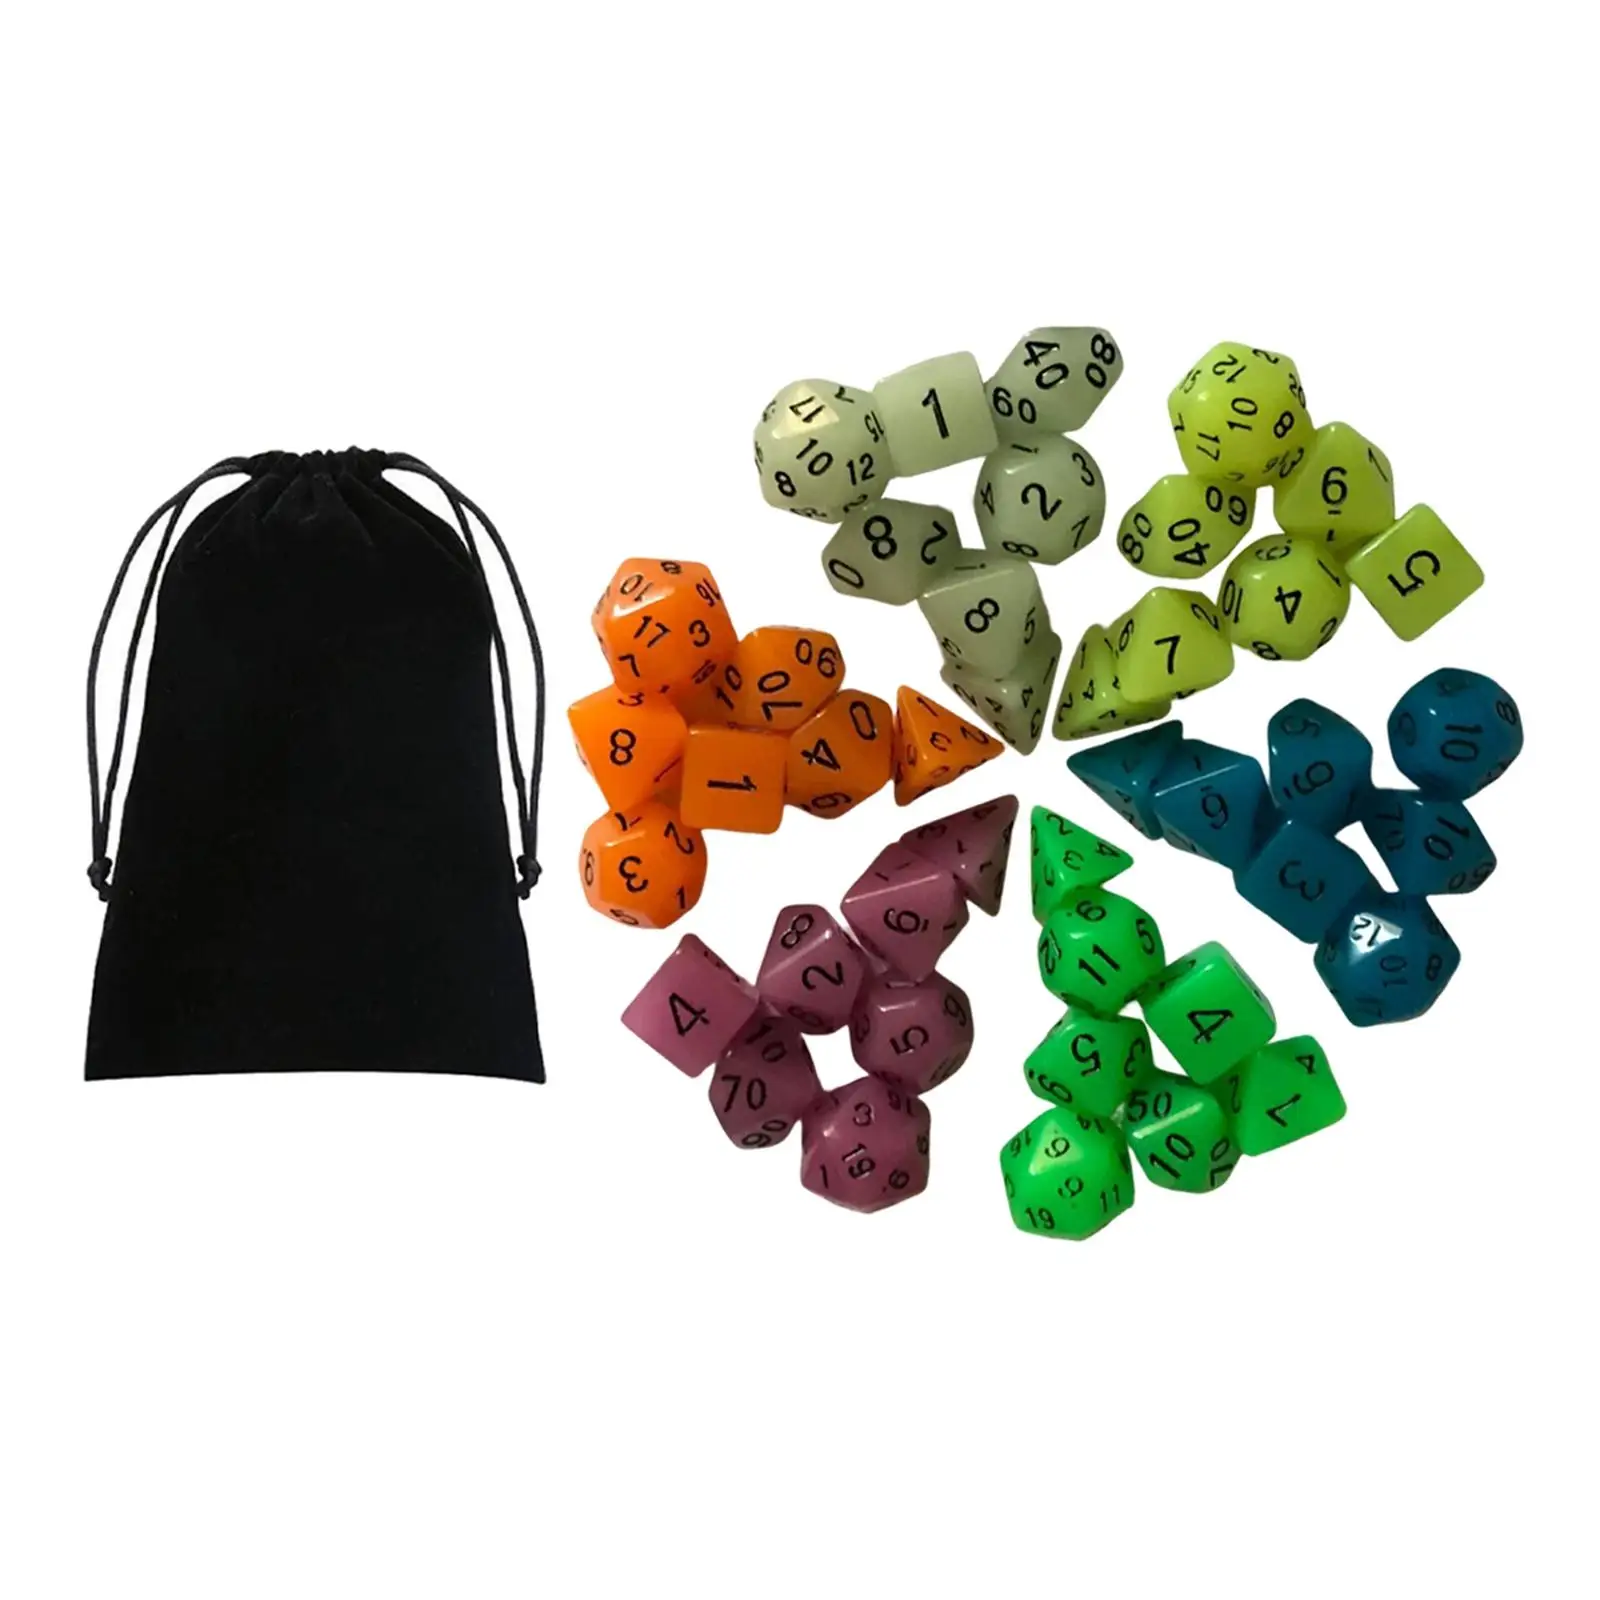 Acrylic Luminous RPG Set D8 D10 D12 D20 with Pouch Glowing Polyhedral Dices Set for DND Role Playing RPG Table Games